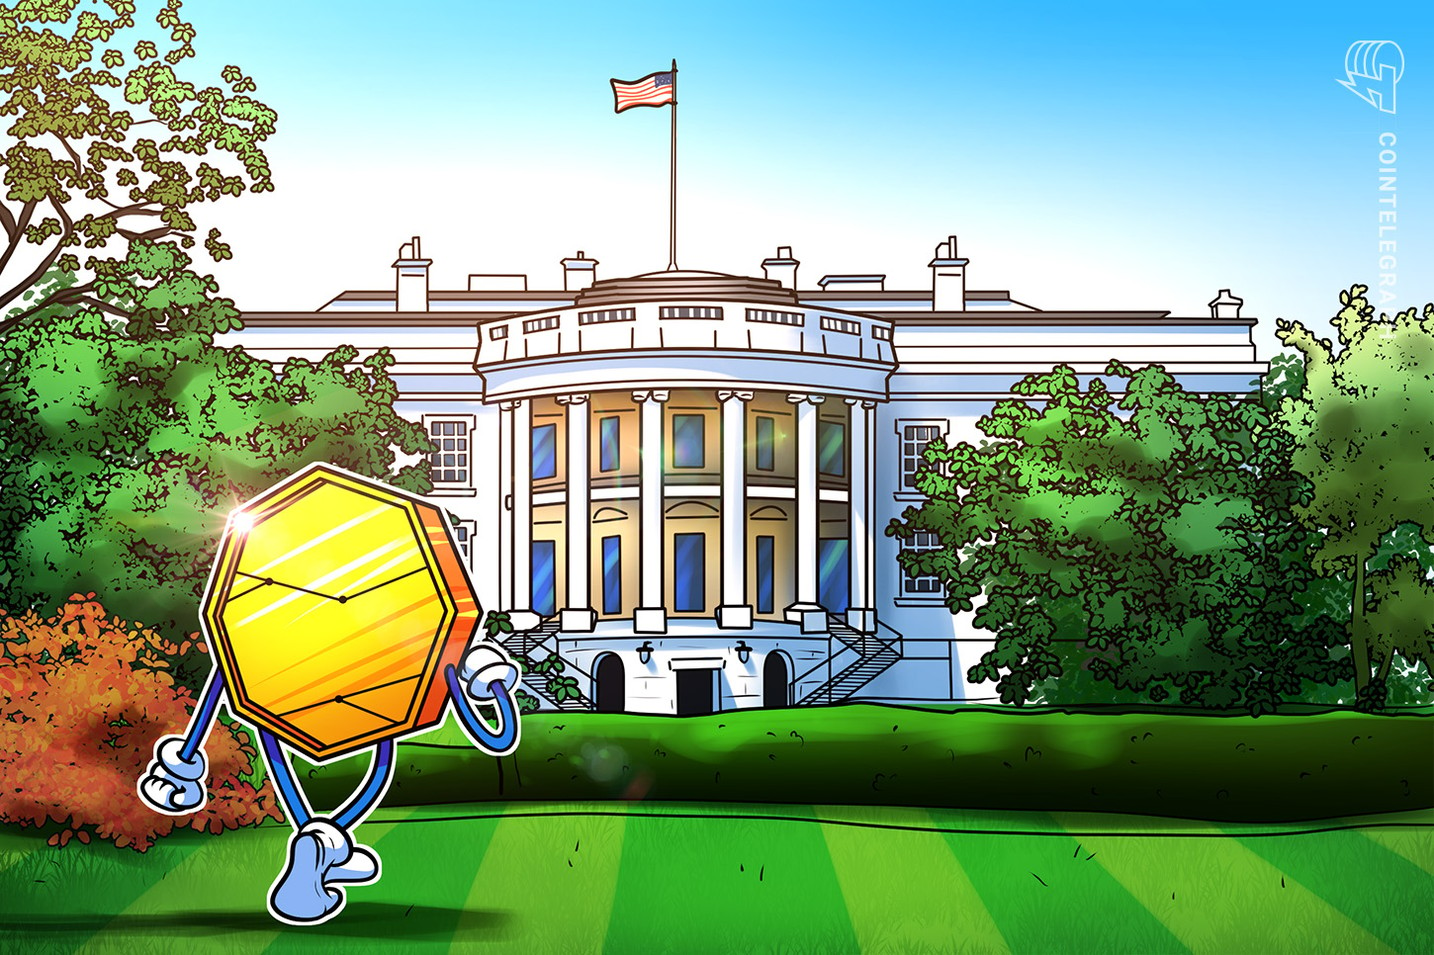 Crypto reform coming to US in 2023, says former White House chief of staff 